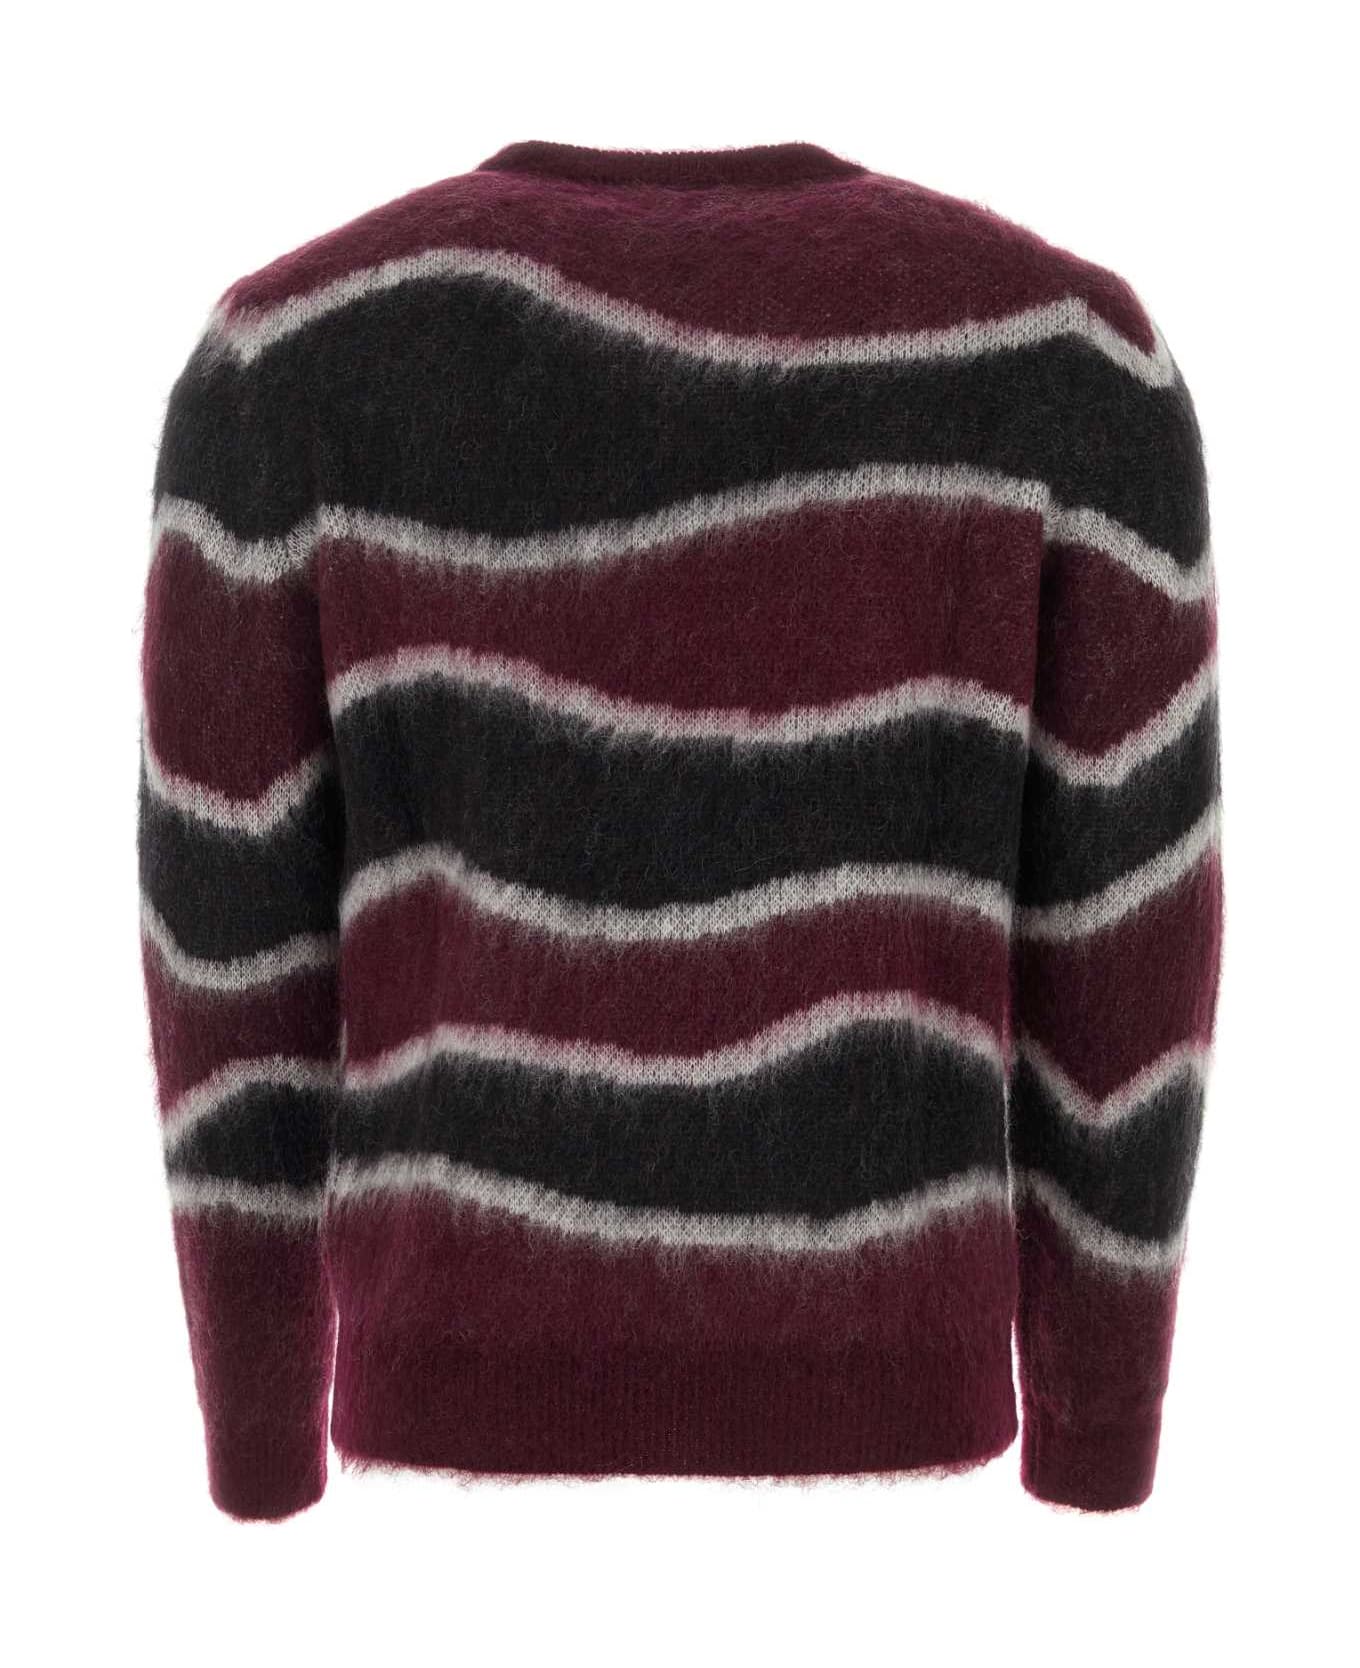 PT Torino Embroidered Mohair Blend Sweater - 0780